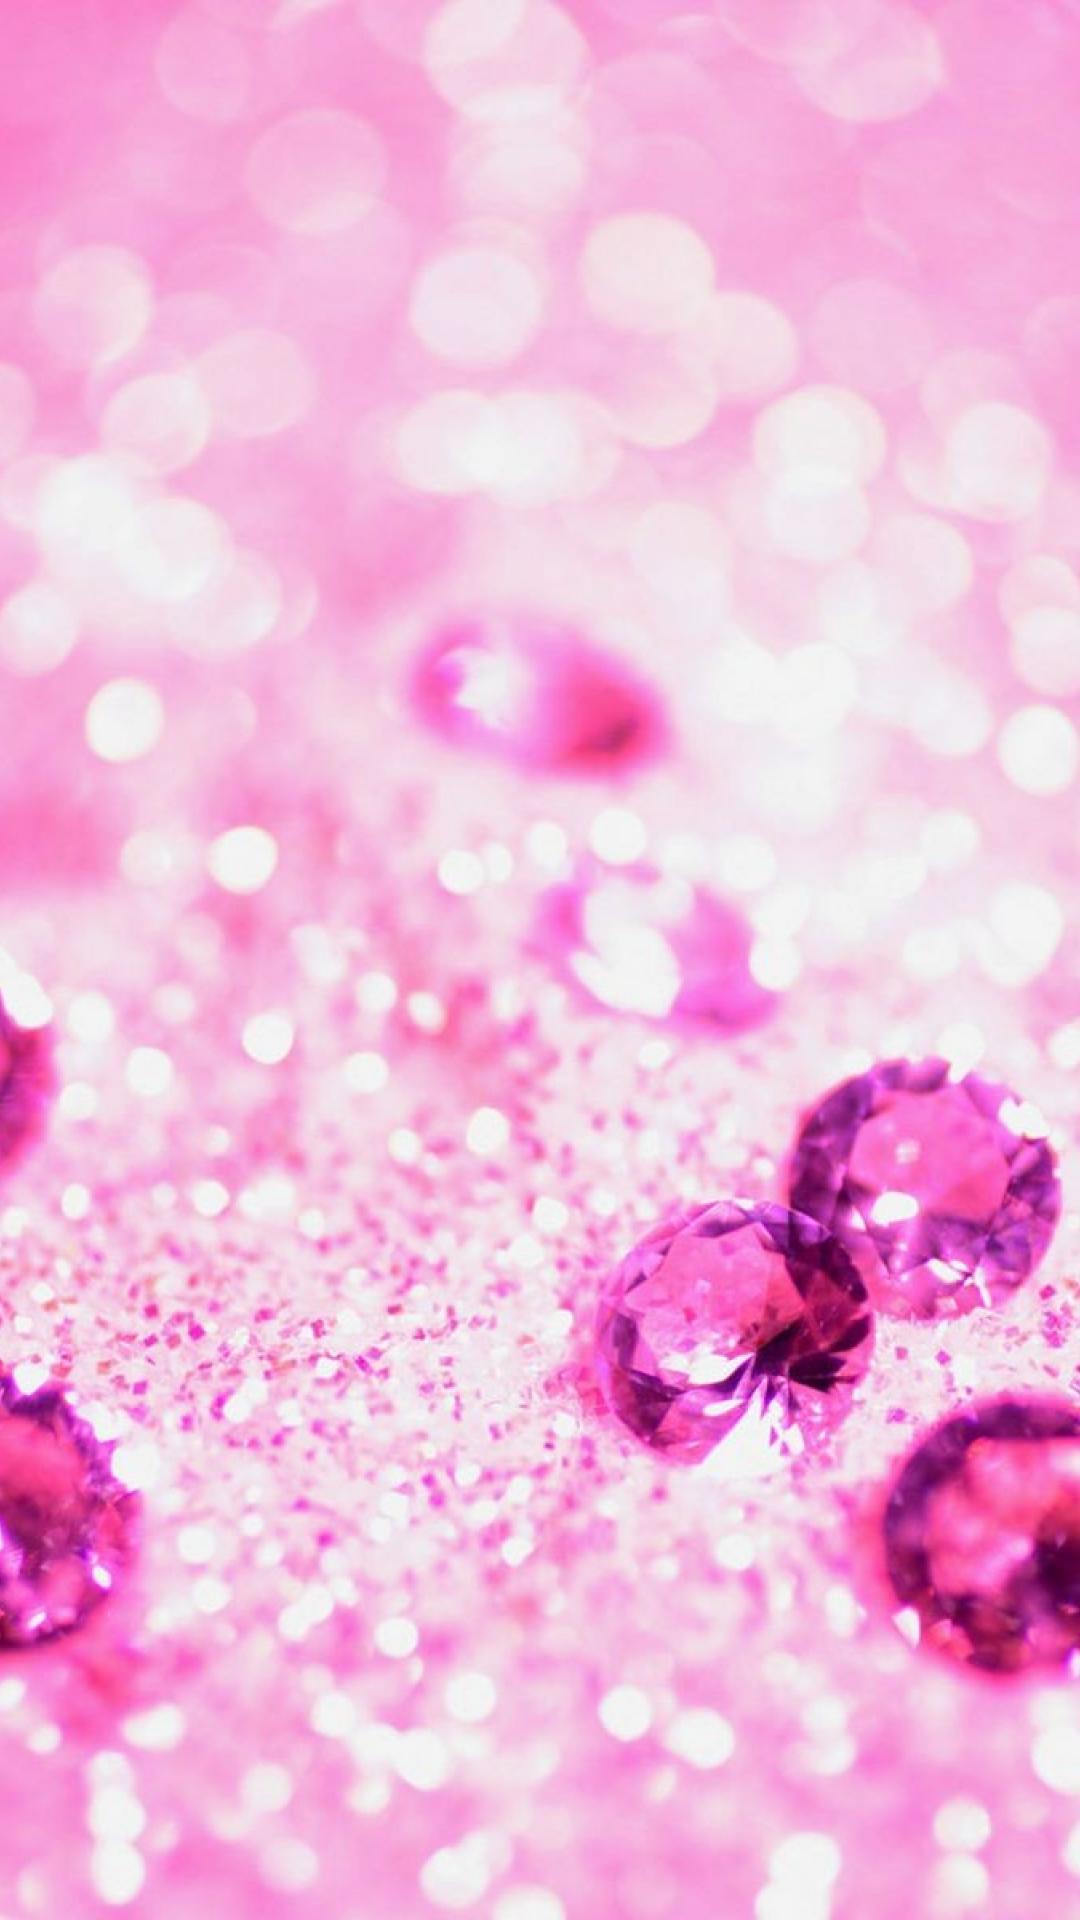 Jewel Background Images HD Pictures and Wallpaper For Free Download   Pngtree